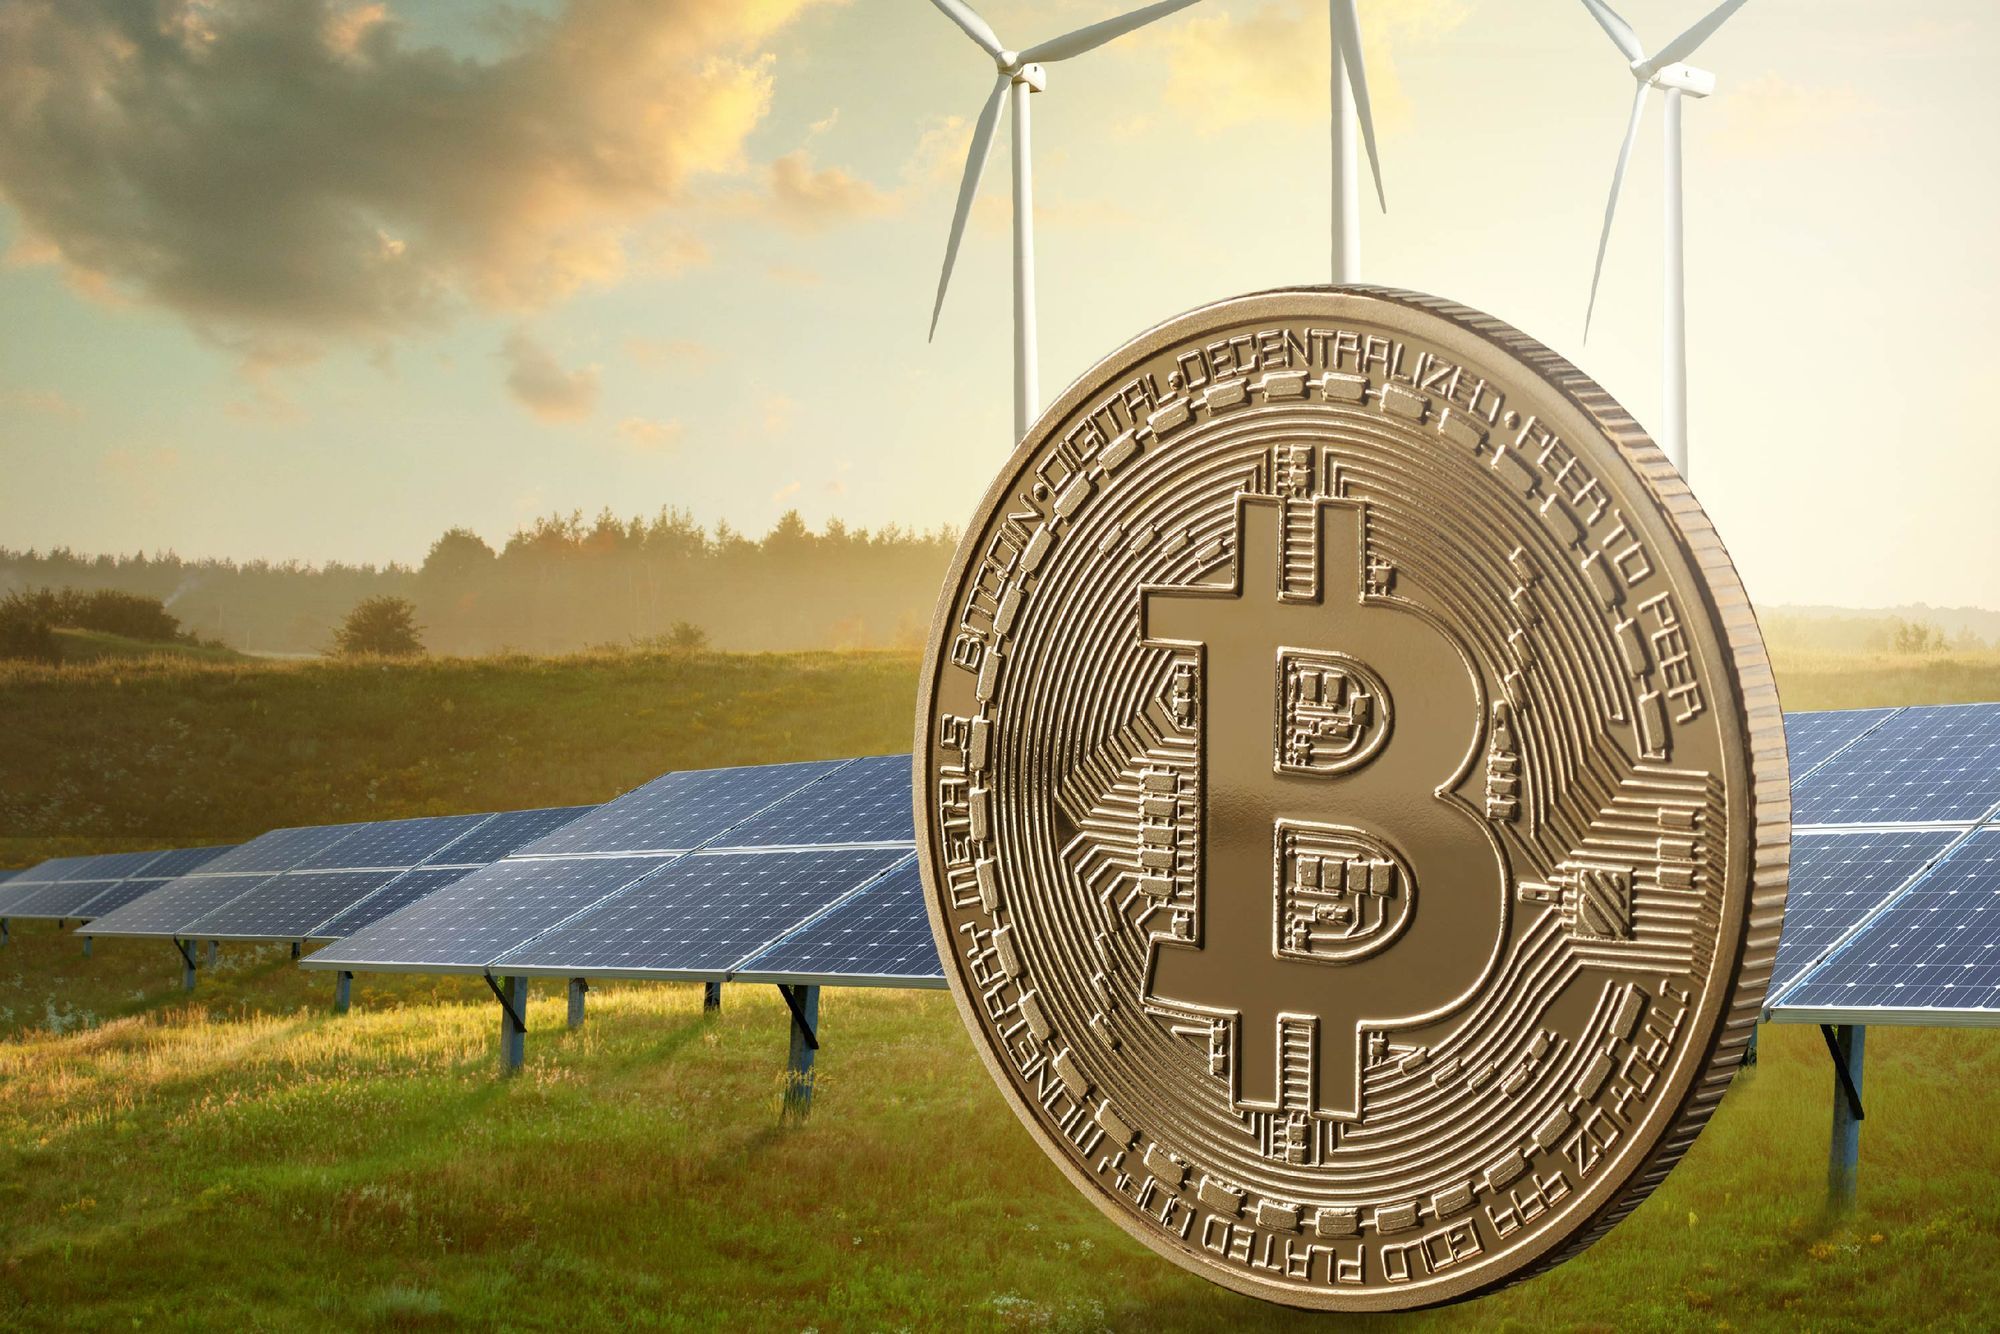 The Bitcoin mining industry is in the first place in terms of the share of a sustainable energy mix